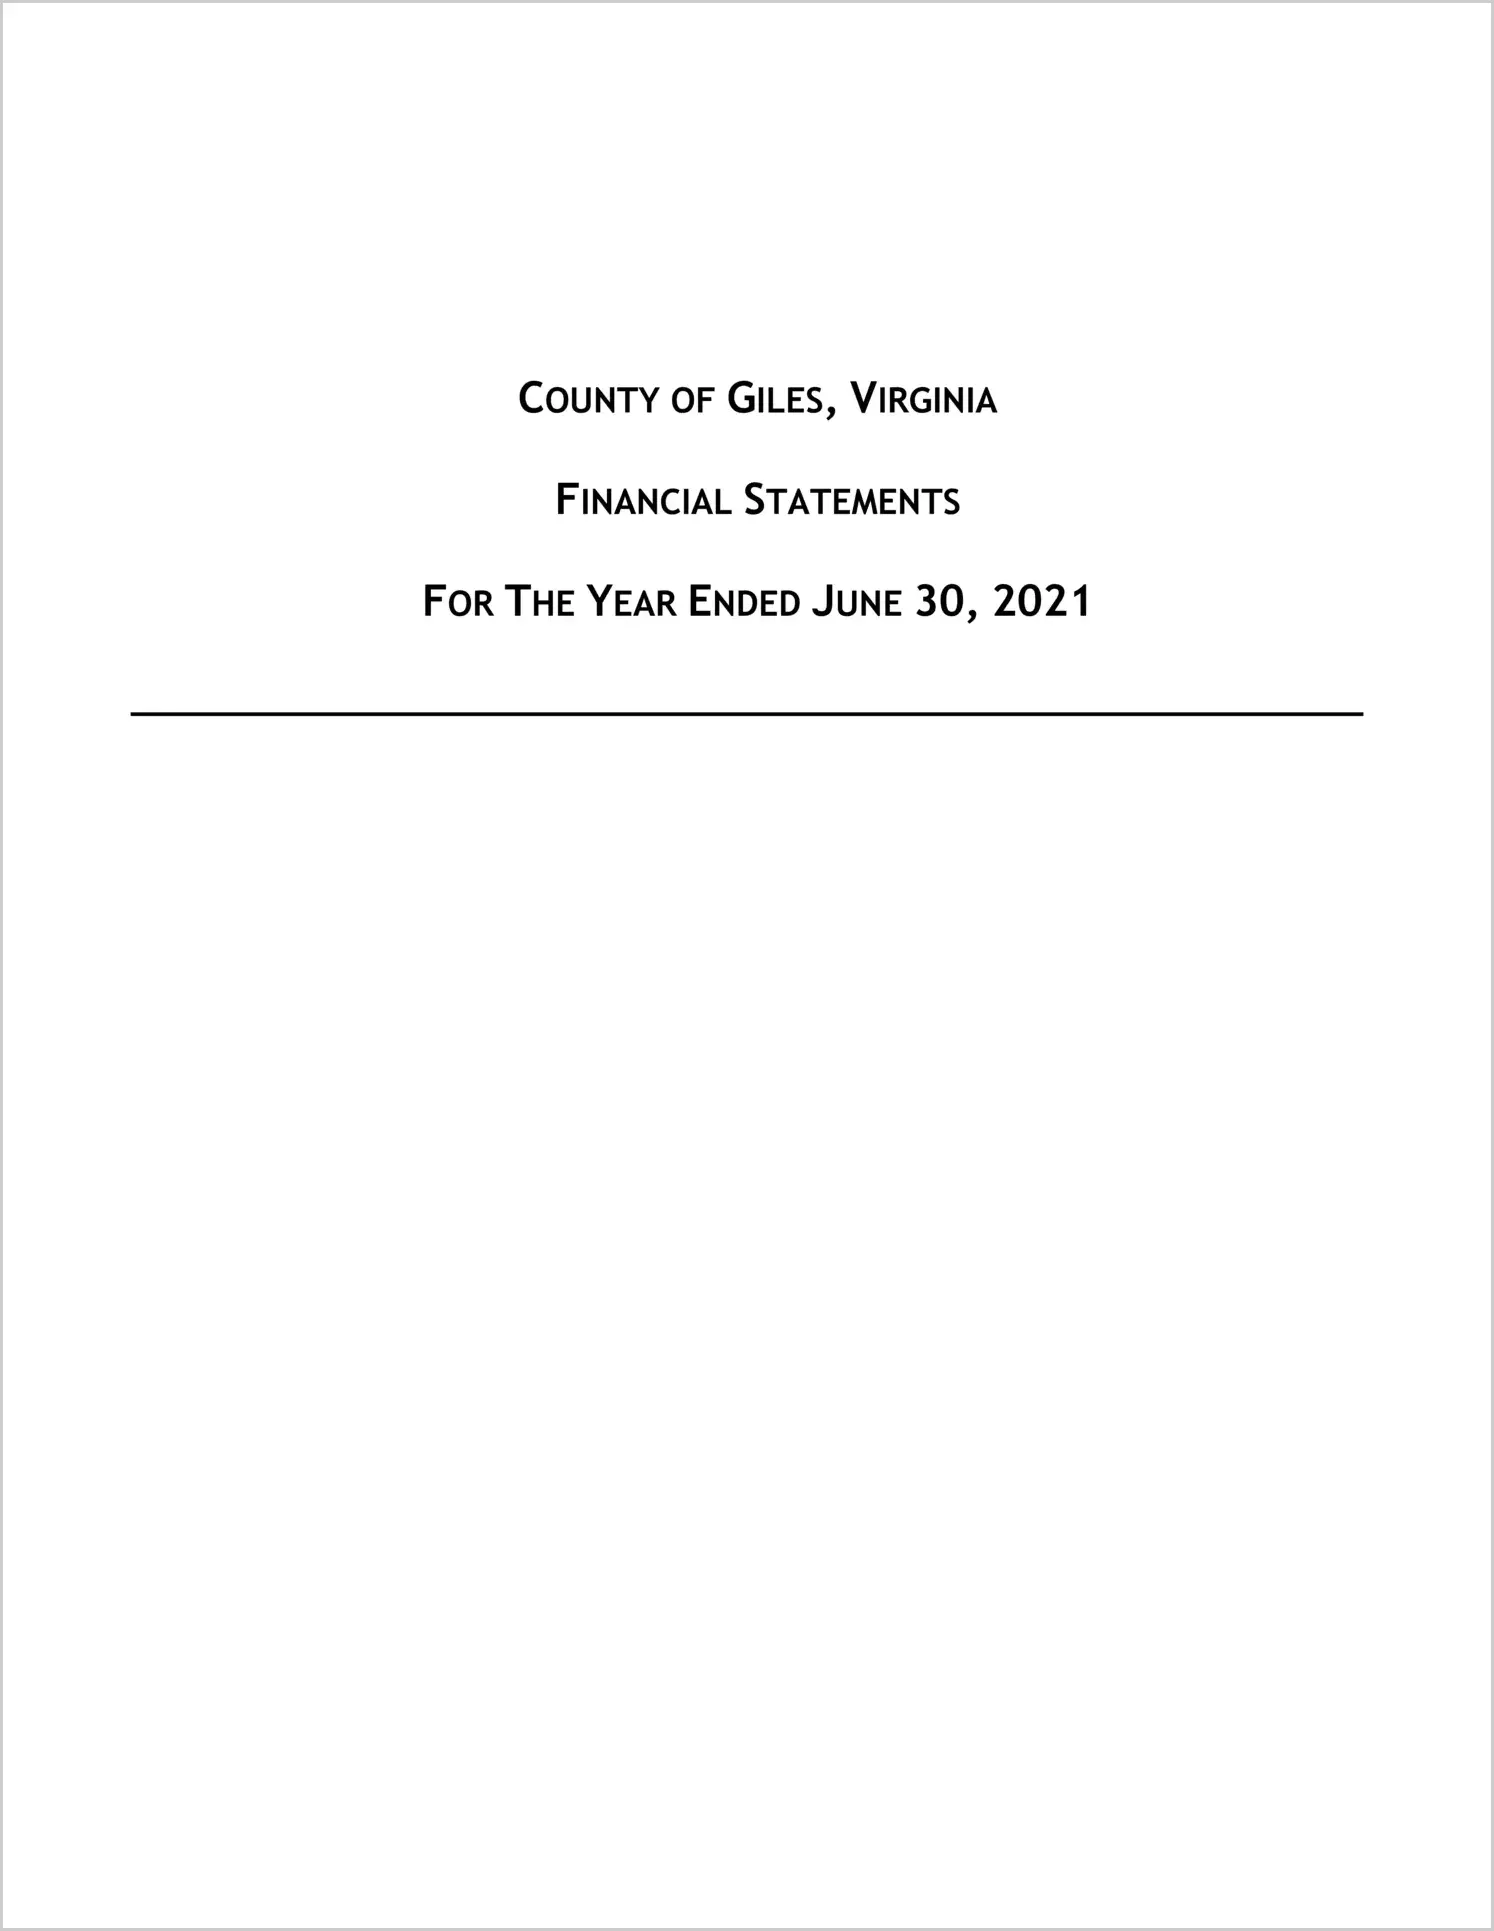 2021 Annual Financial Report for County of Giles